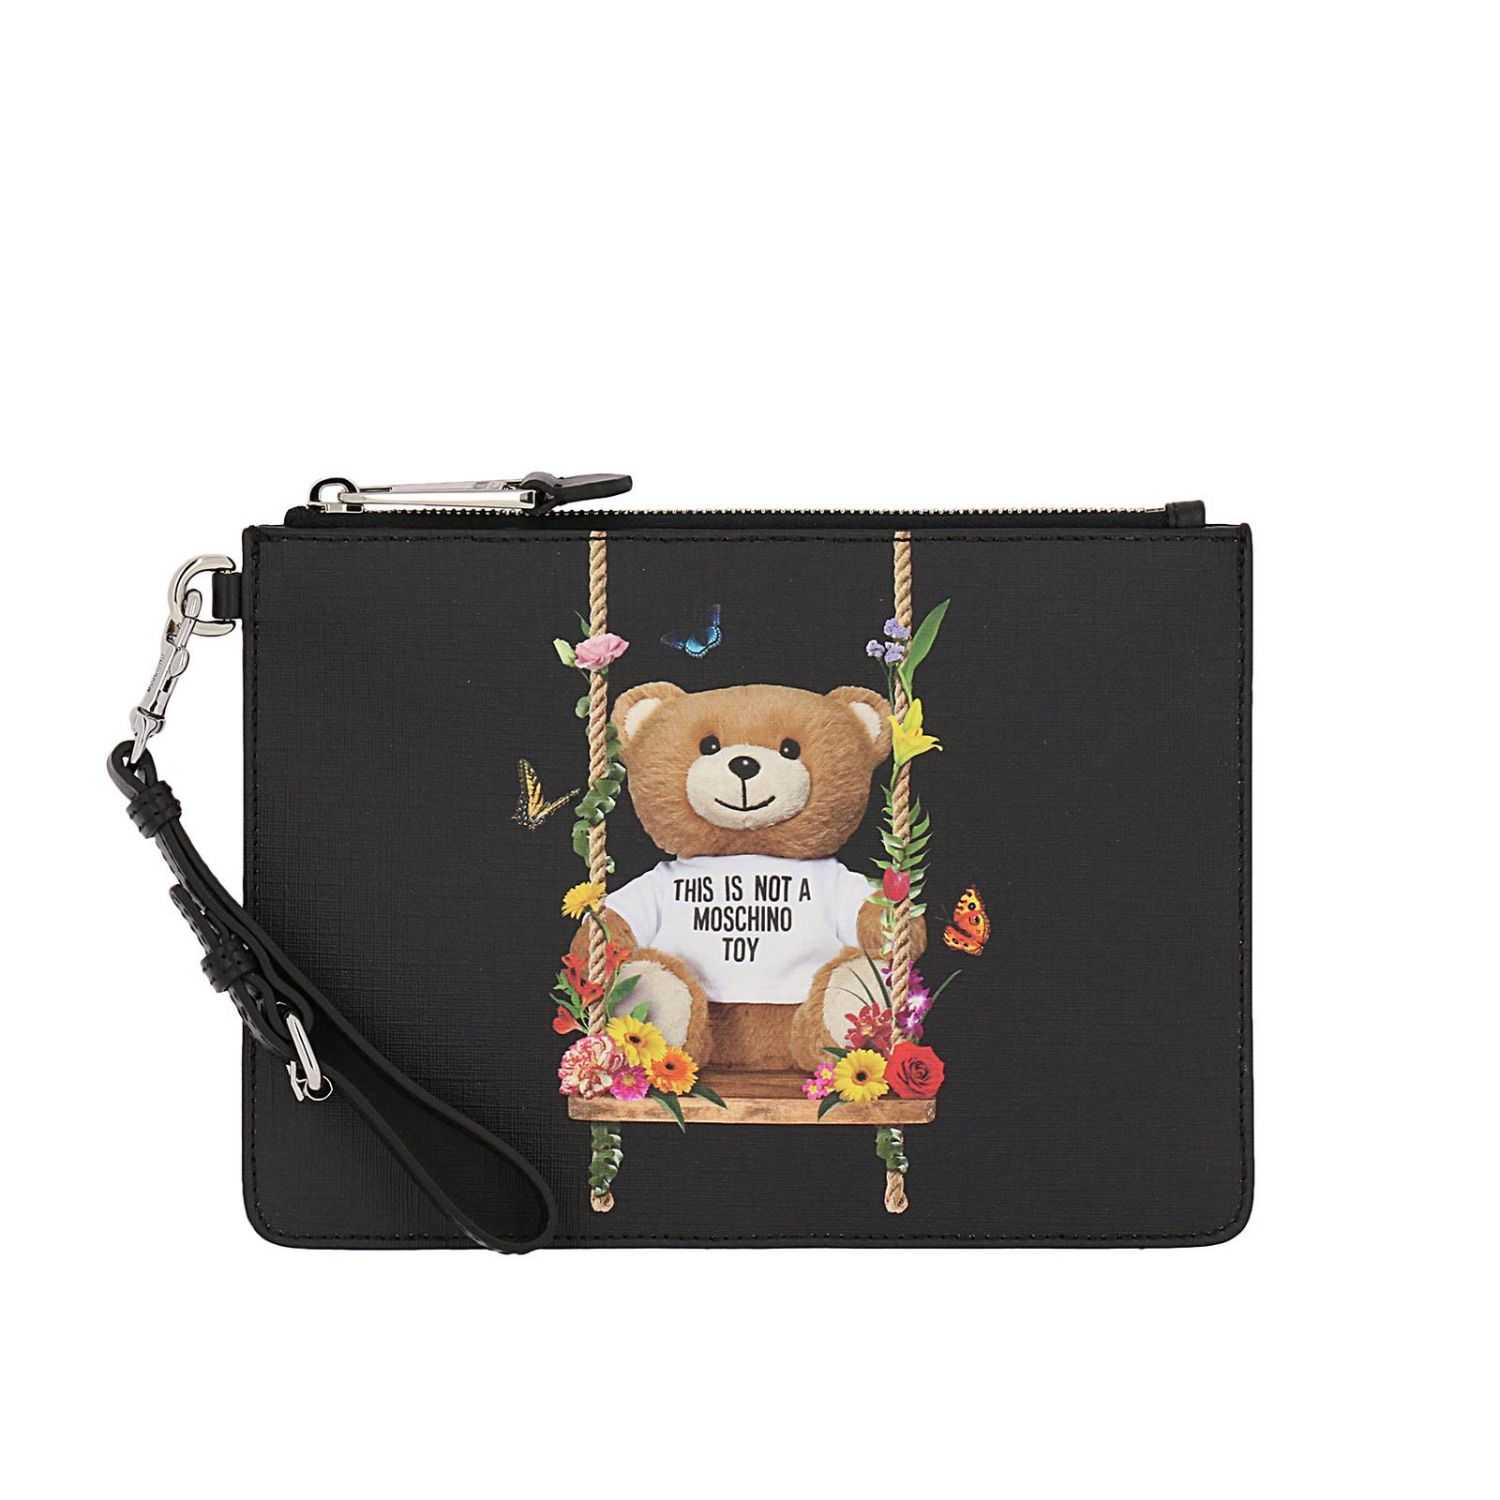 Moschino Couture Outlet: Shoulder bag women | Clutch Moschino Couture ...